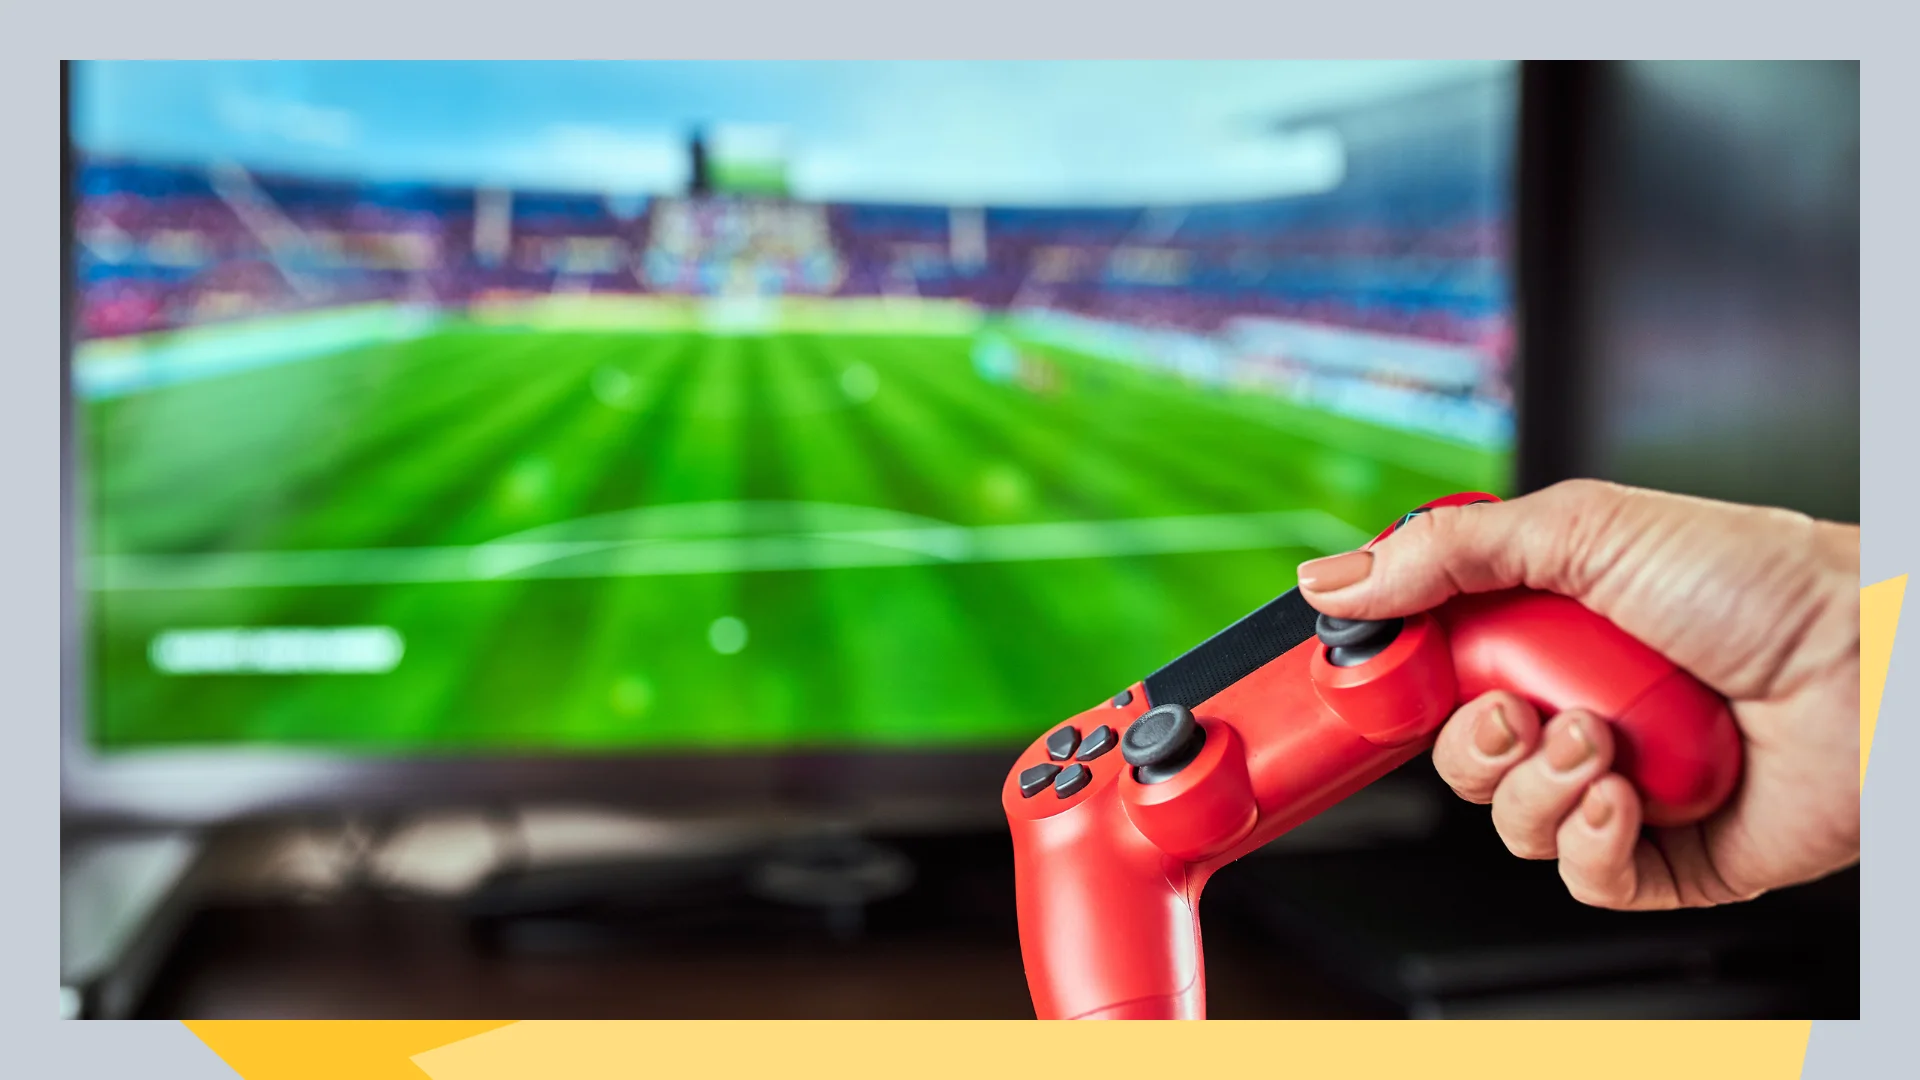 Soccer video games have almost always been popular on all platforms and consoles